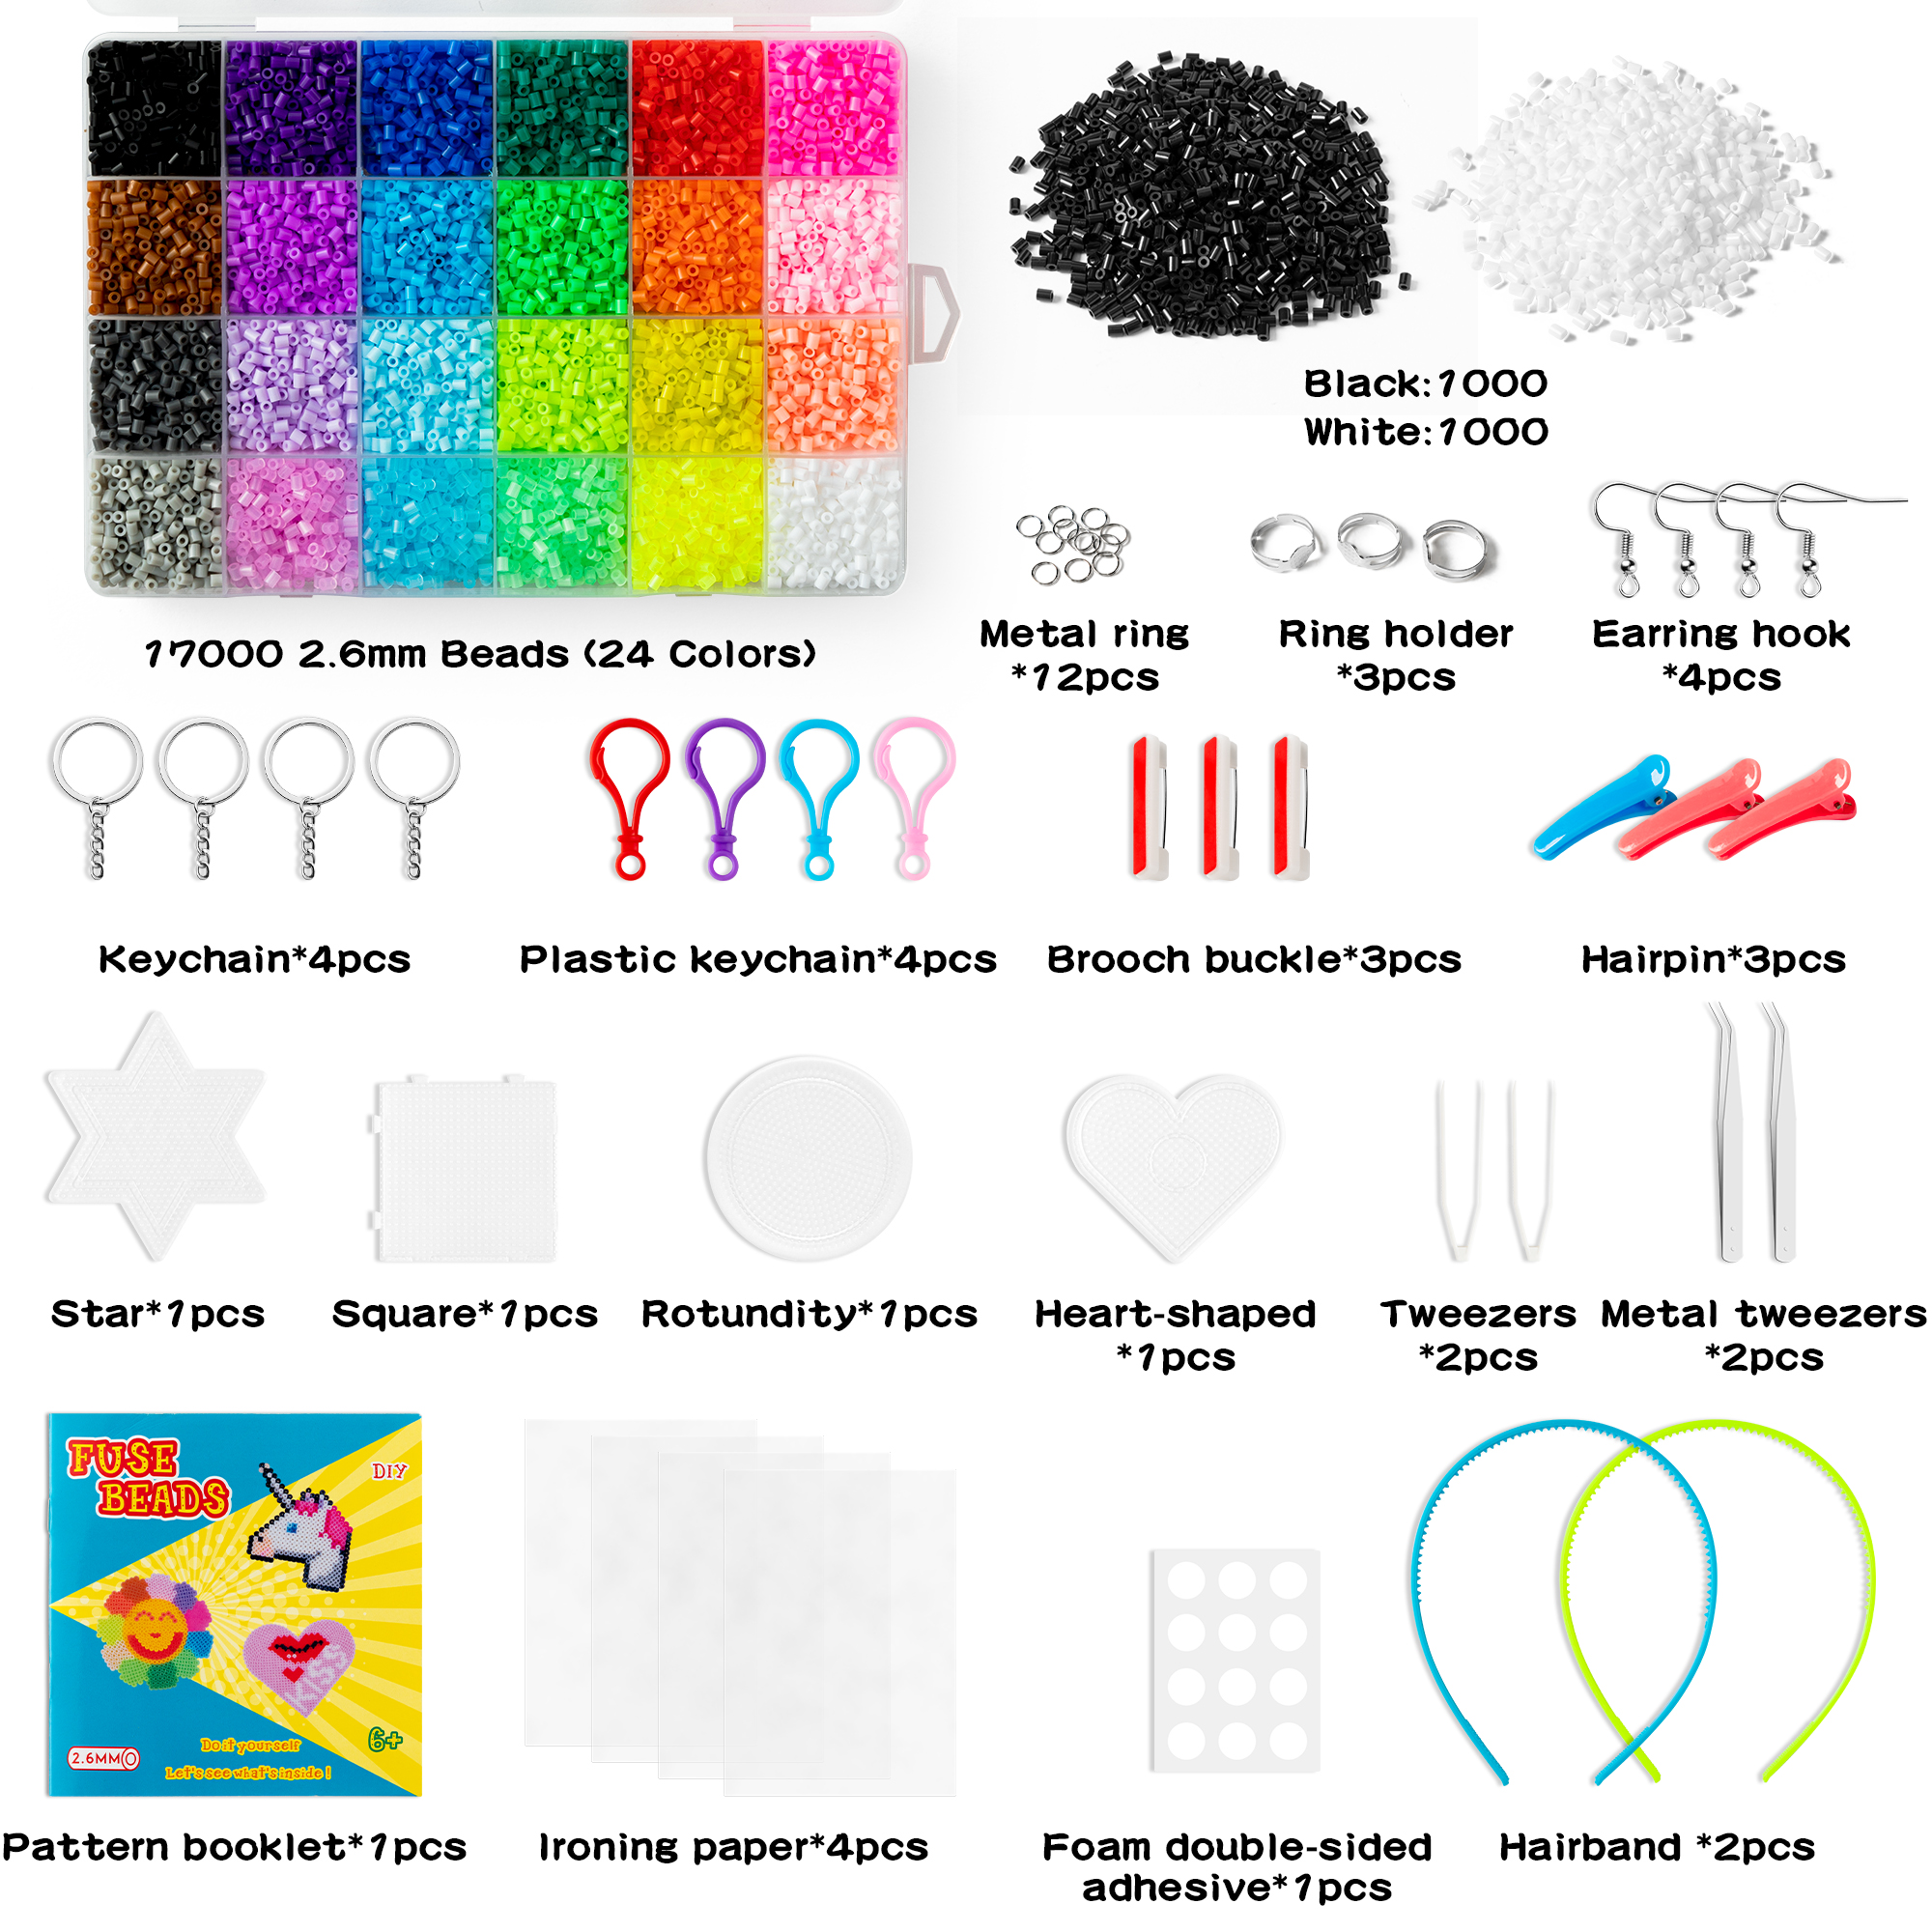 BUoonyer 17060Pcs Mini Fuse Beads Kit, Melting Beads Set for Kids Crafts,  Including 24 Colors 2.6mm Iron Beads, Pegboards, Ironing Papers, Tweezers